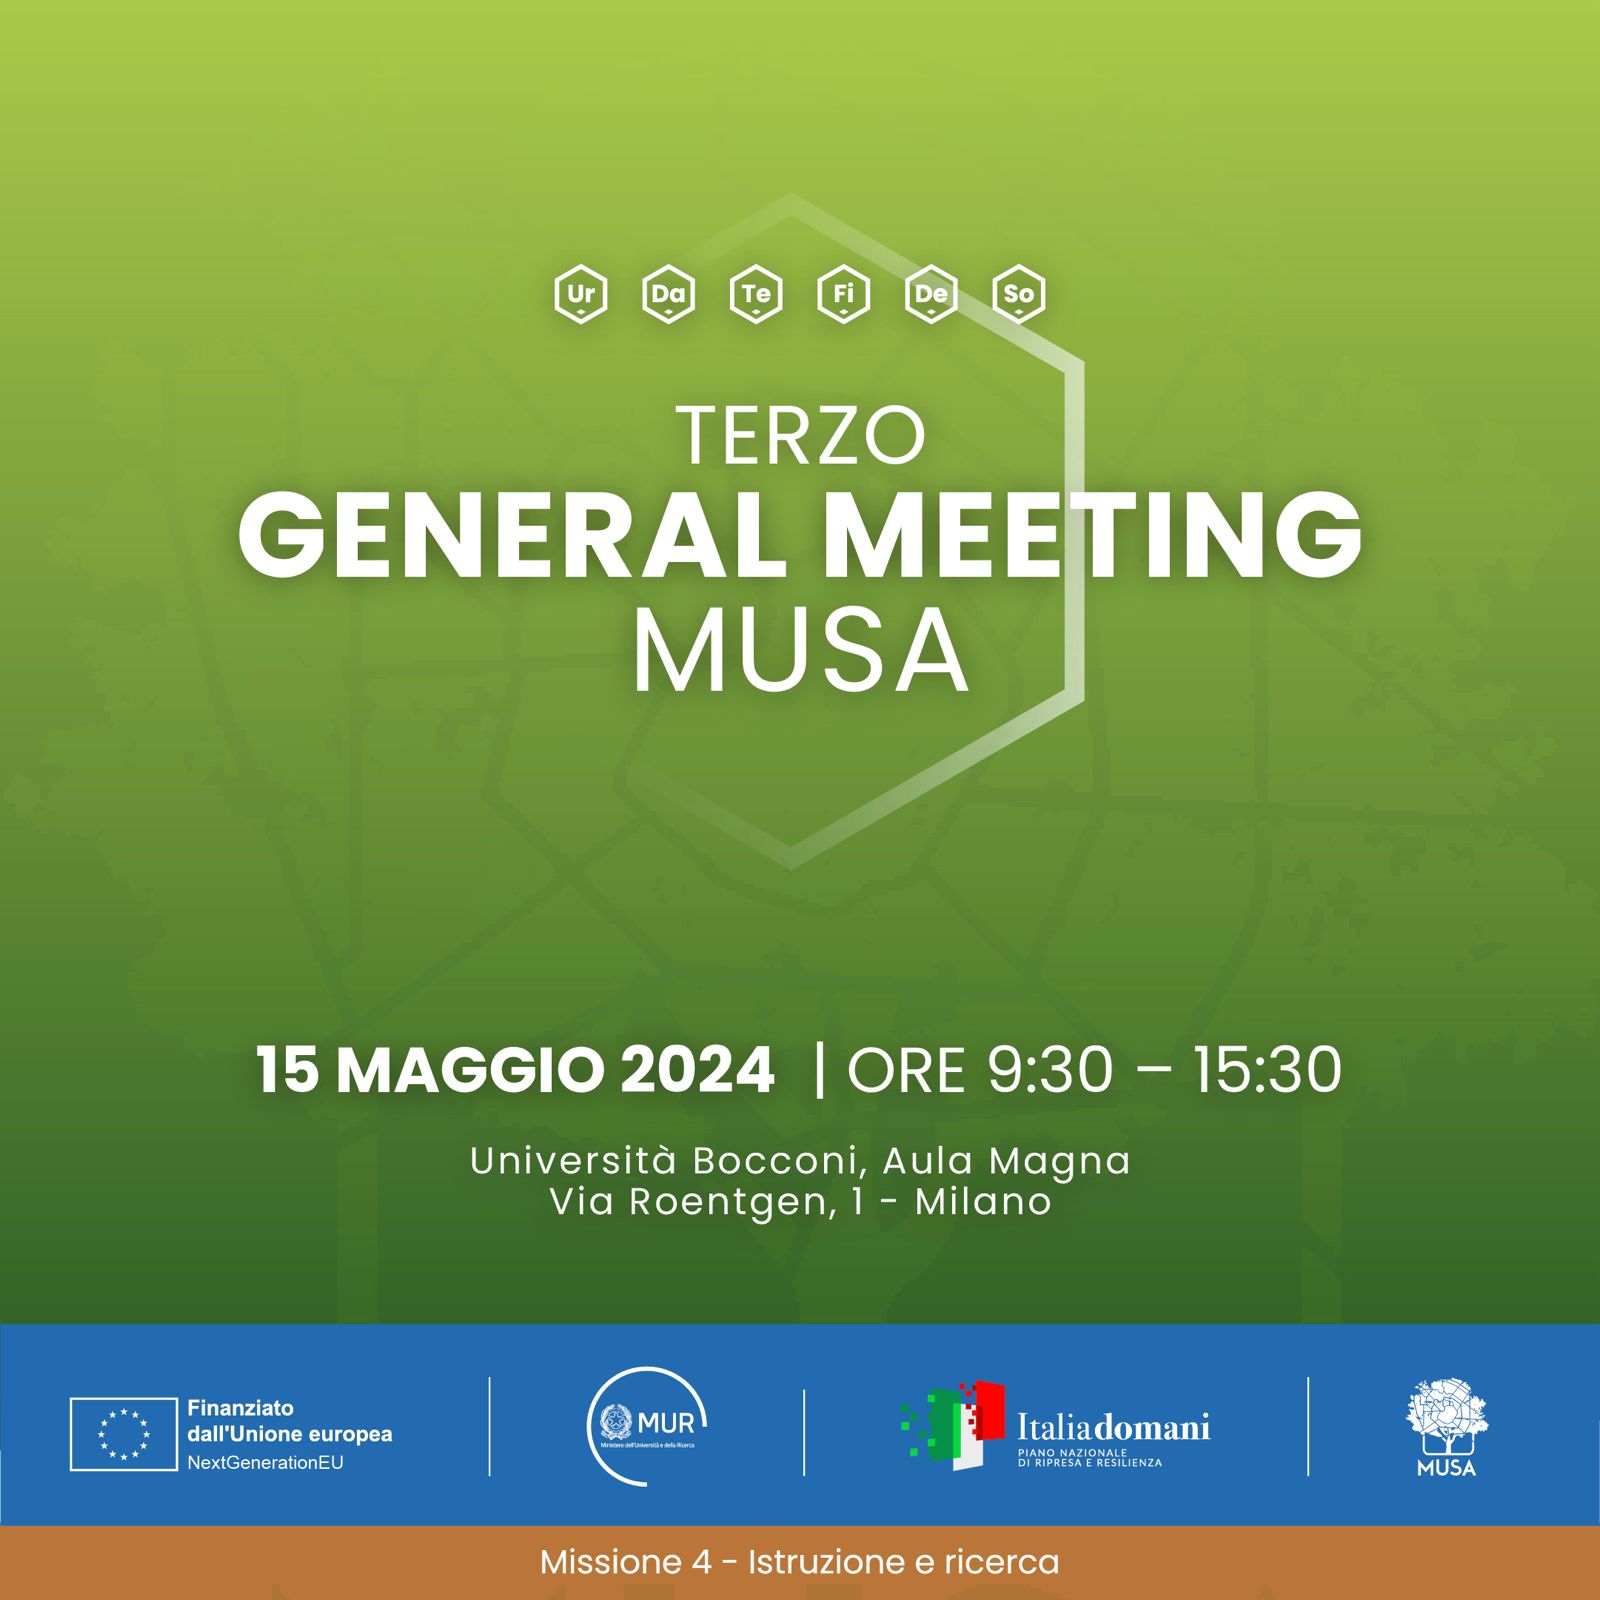 MUSA's Third General Meeting: Showcasing Advances in Scientific Research at Bocconi University